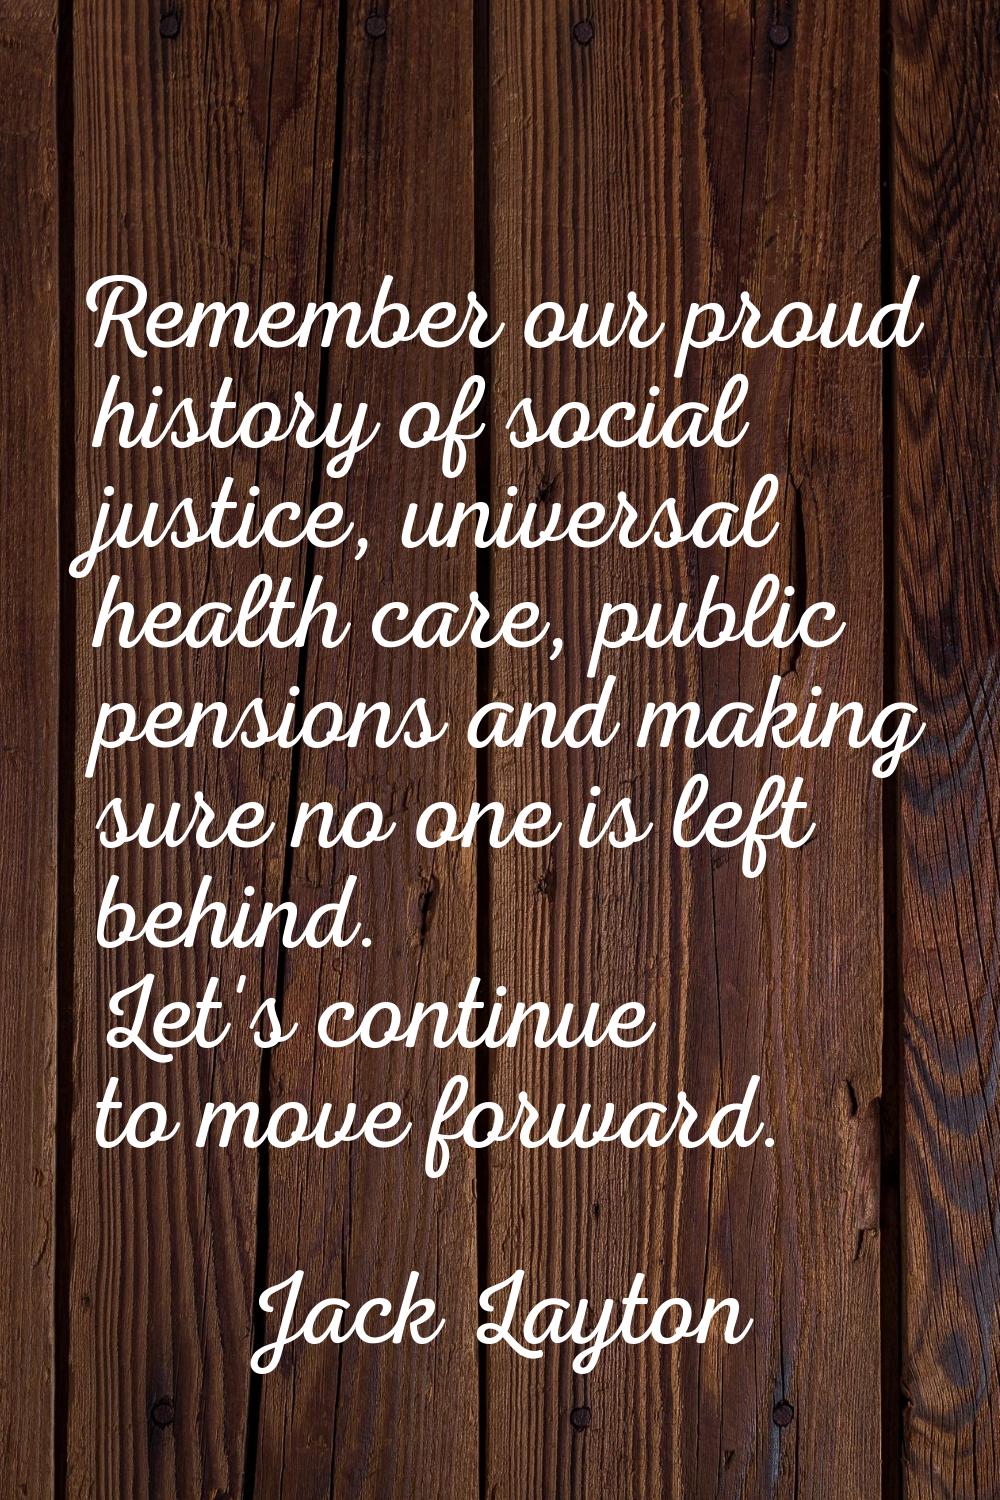 Remember our proud history of social justice, universal health care, public pensions and making sur